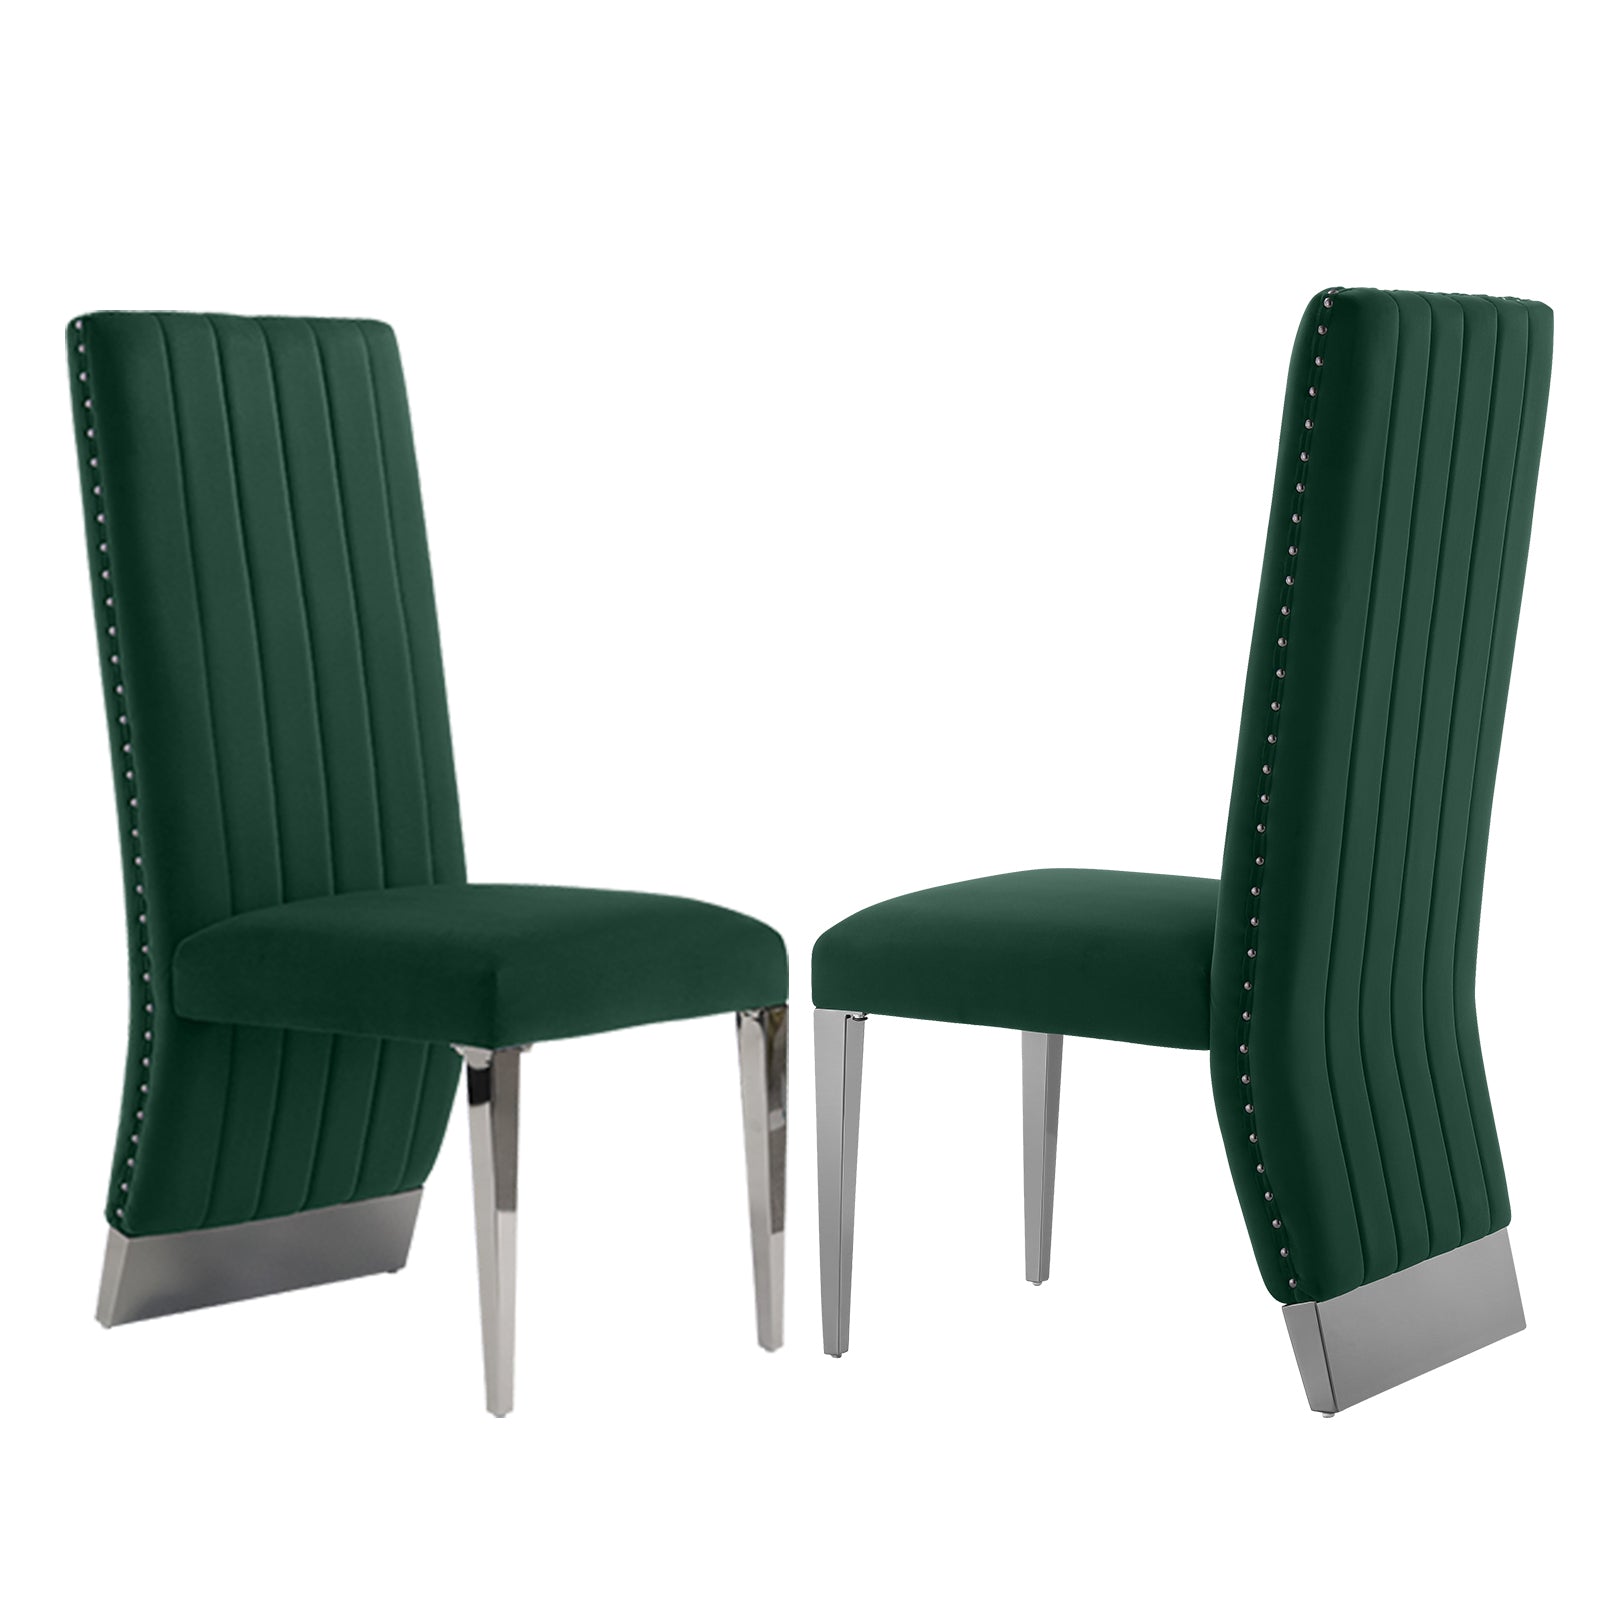 Experience Elegance and Versatility with our Emerald Green Velvet Dining Chairs